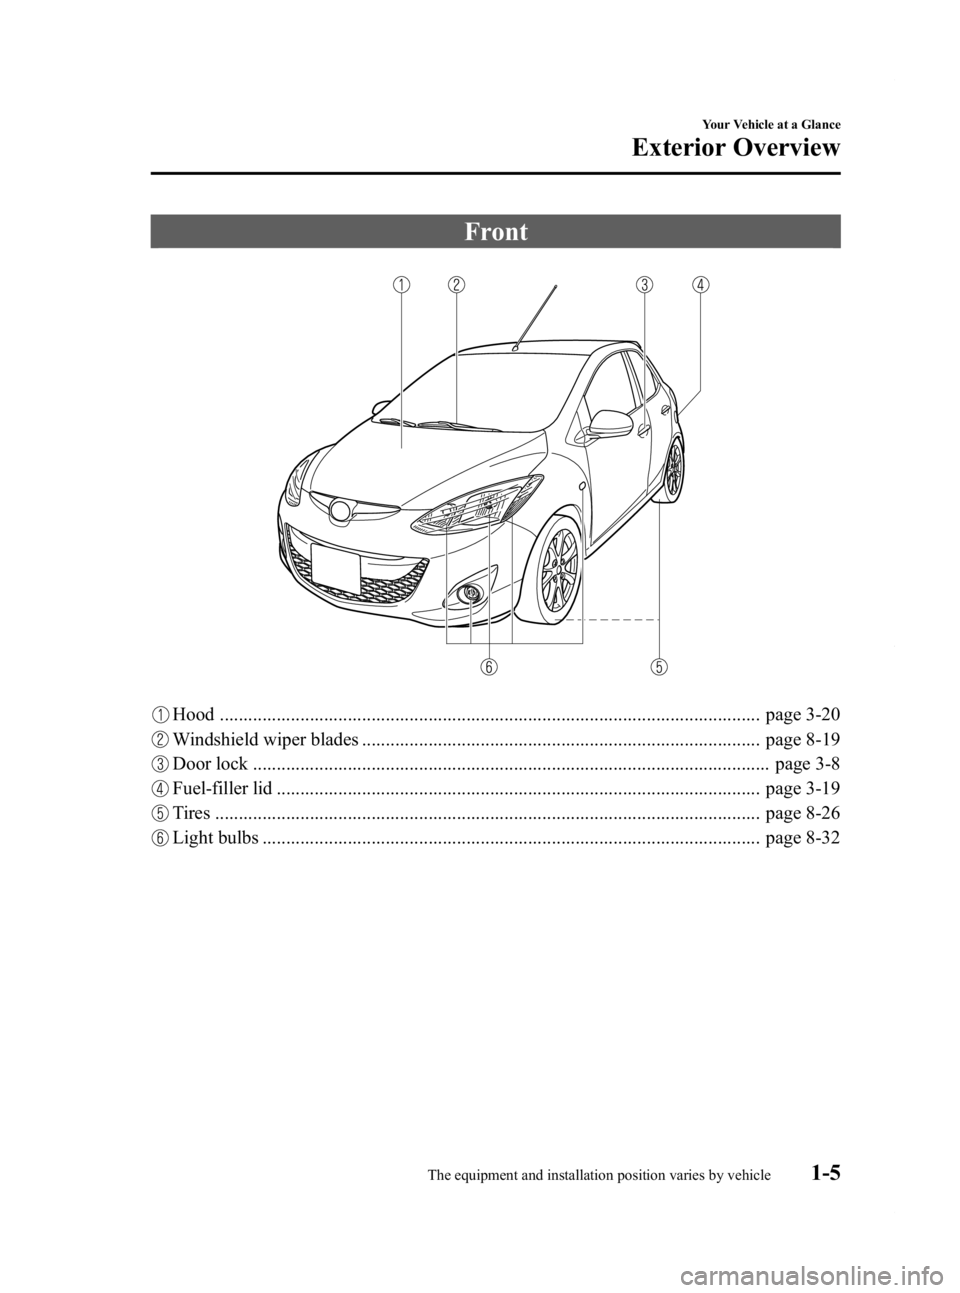 MAZDA MODEL 2 2012  Owners Manual Black plate (11,1)
Front
Hood .................................................................................................................. page 3-20
Windshield wiper blades .....................